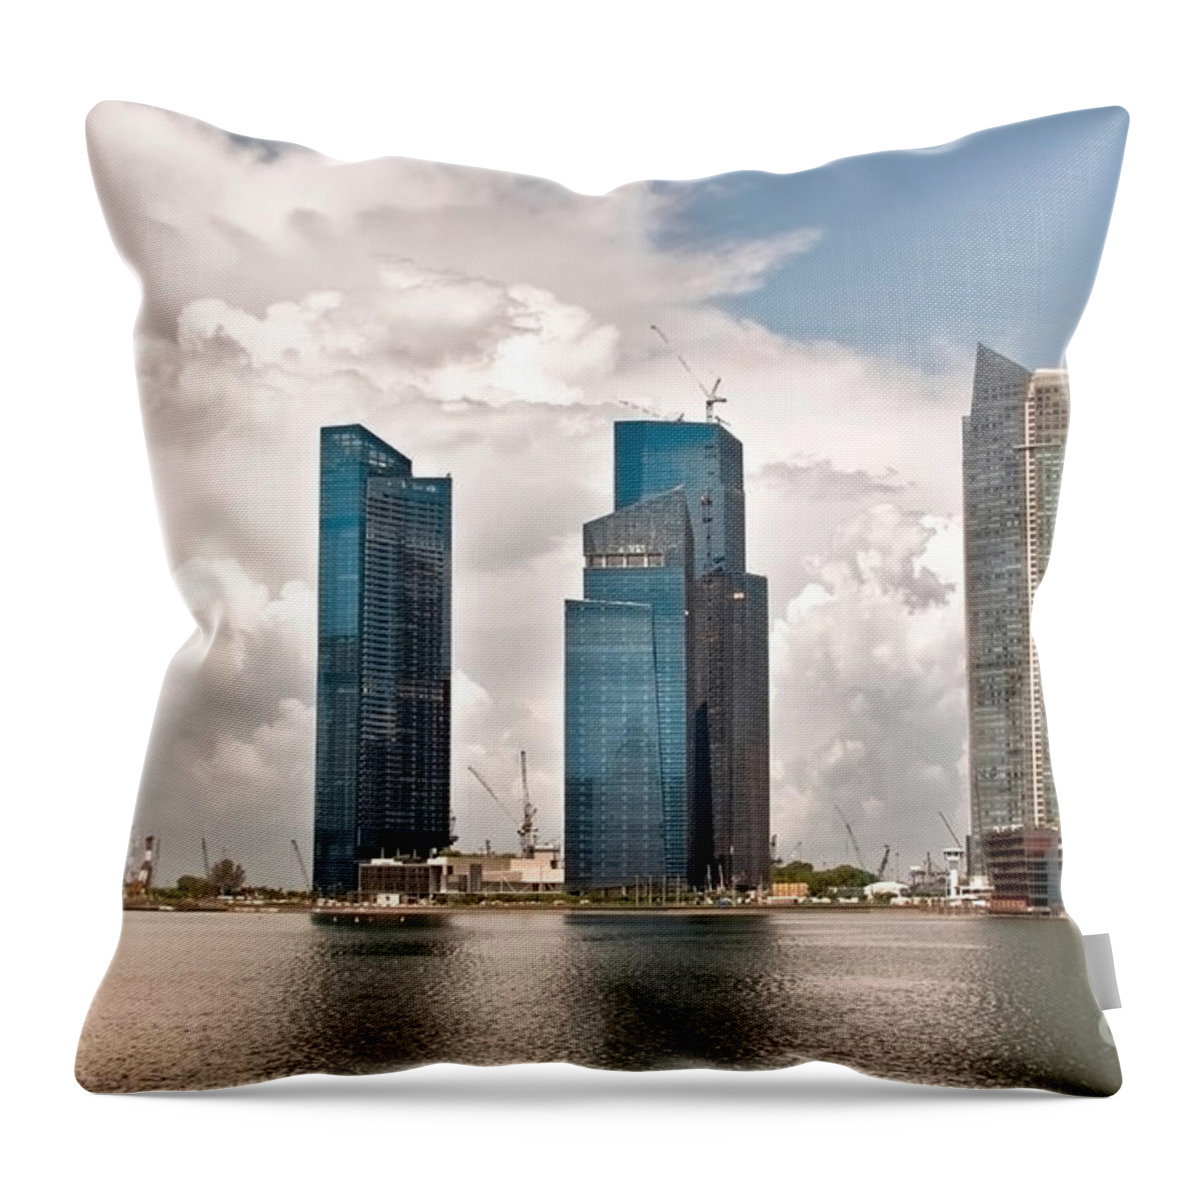 Singapore Throw Pillow featuring the photograph Singapore #1 by Charuhas Images